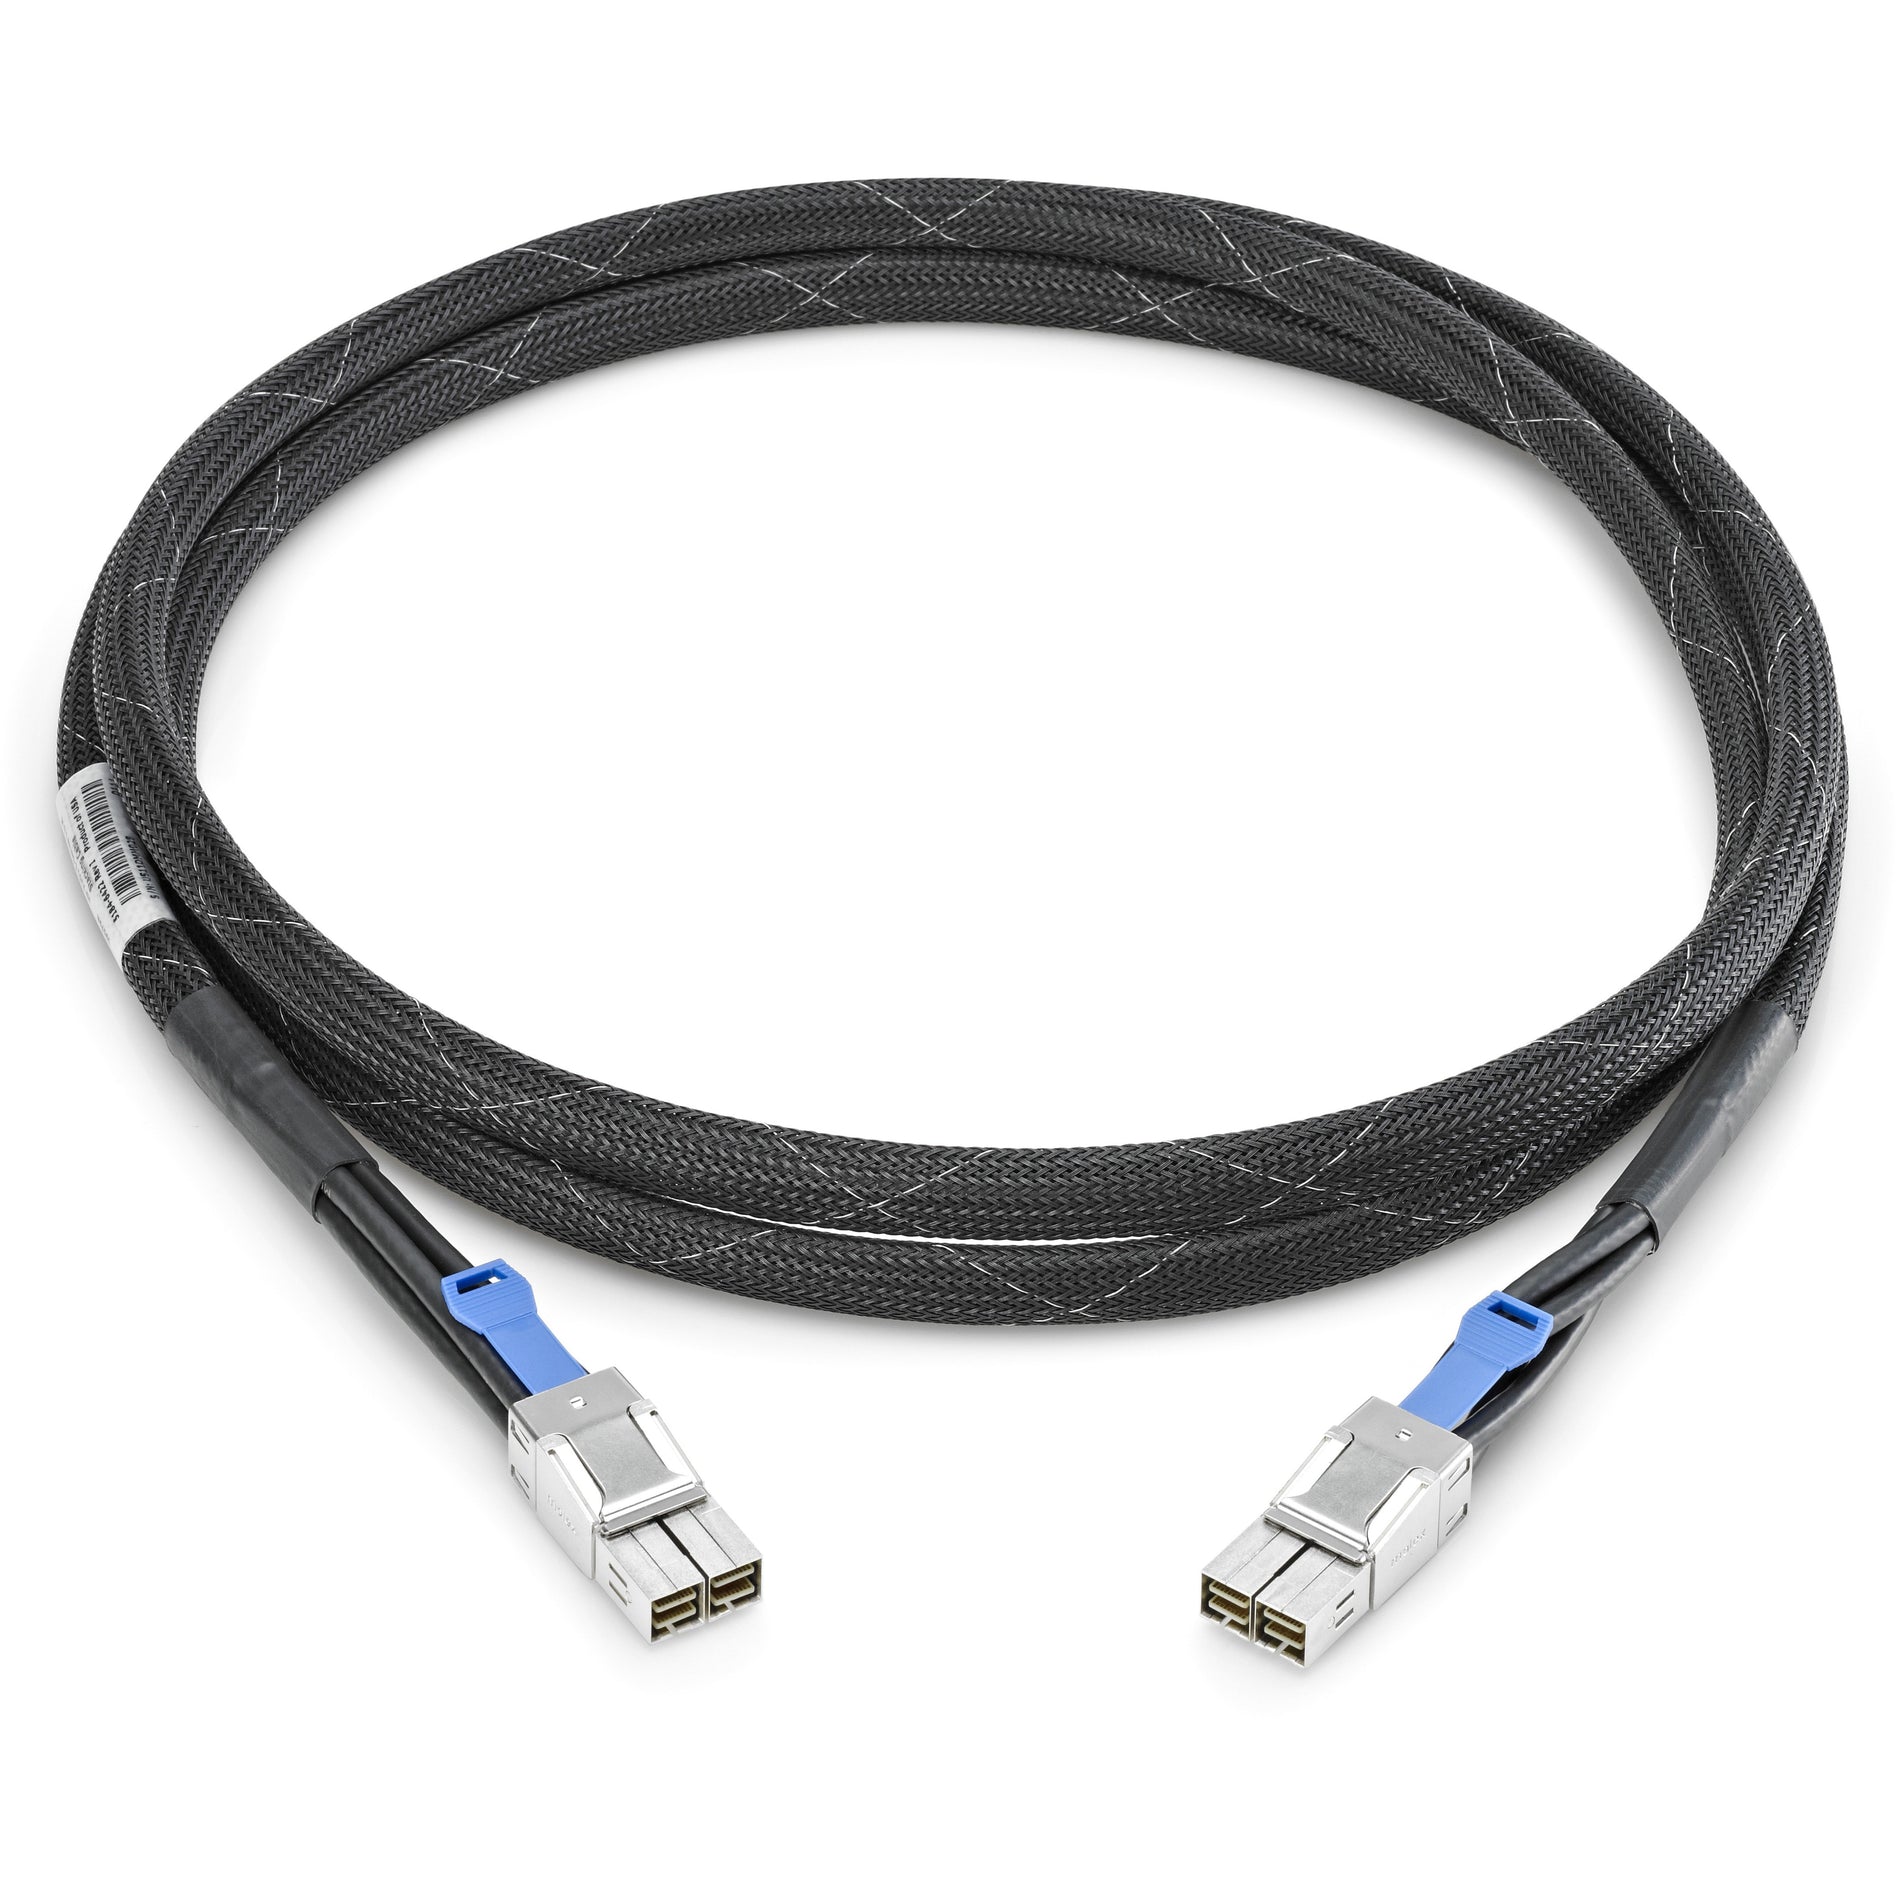 HPE E 3800 1-m Stacking Cable (J9665A)